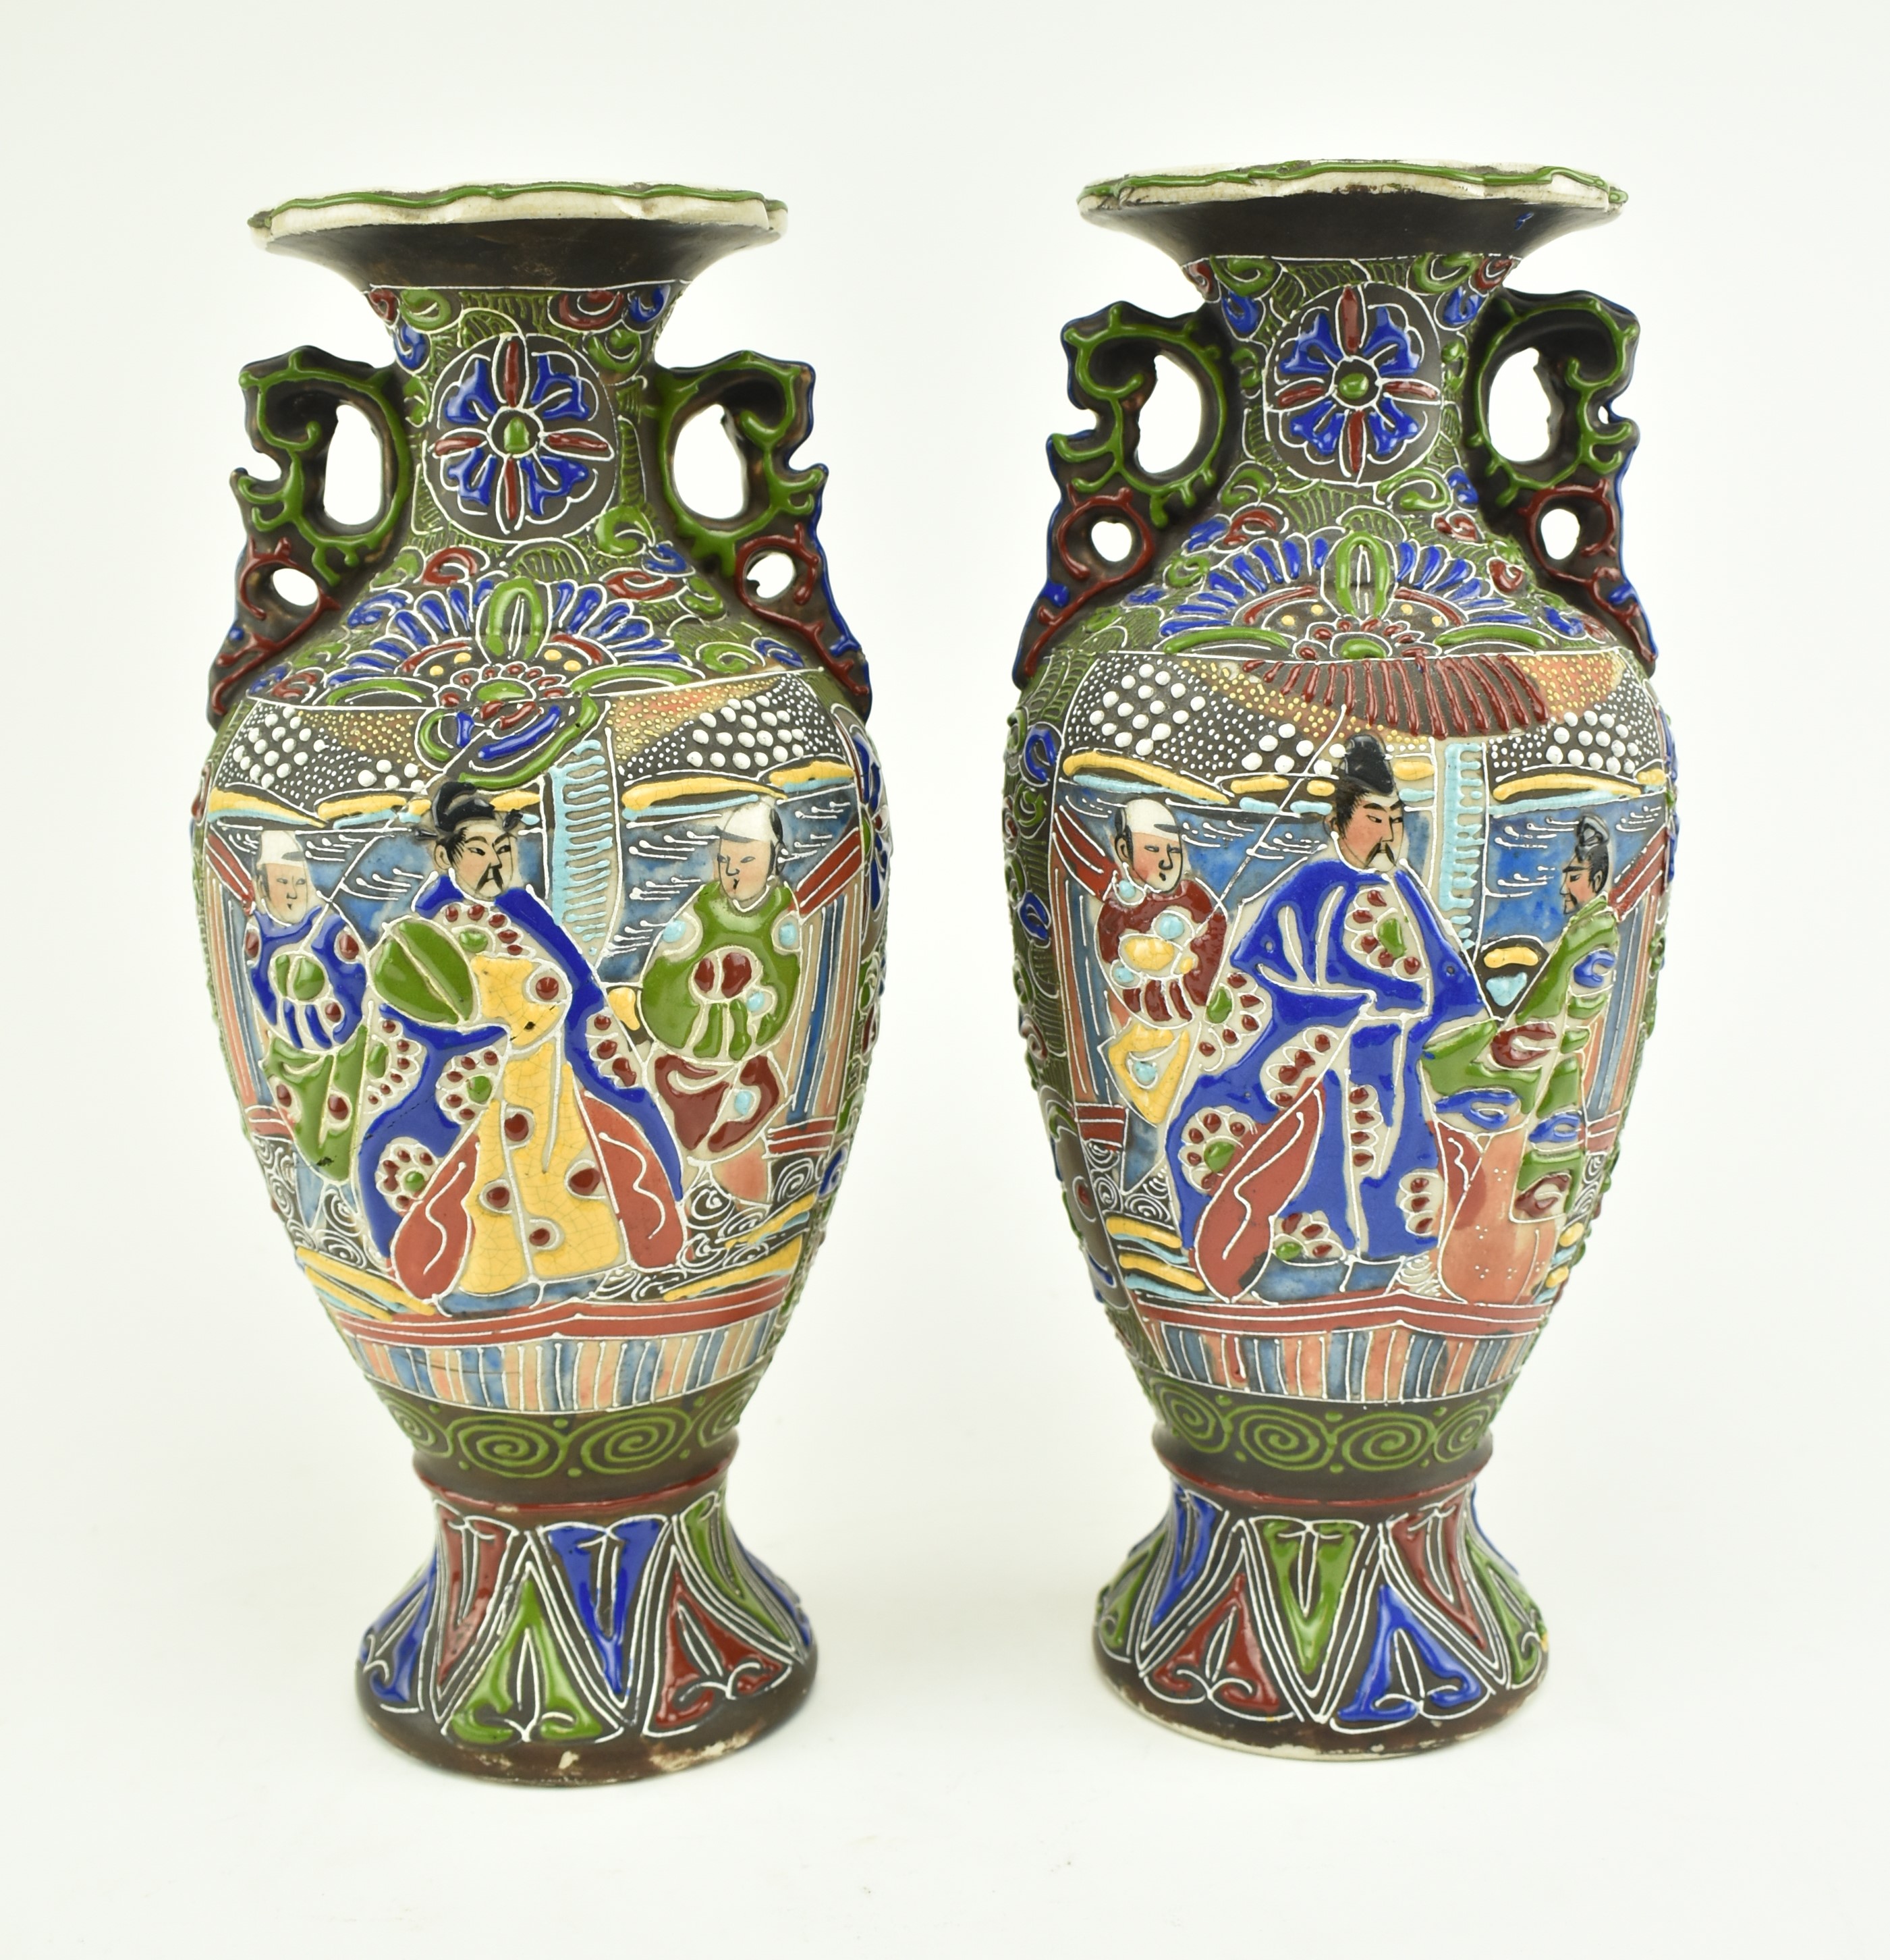 PAIR OF JAPANESE EARLY 20TH CENTURY MORIAGE CERAMIC VASES